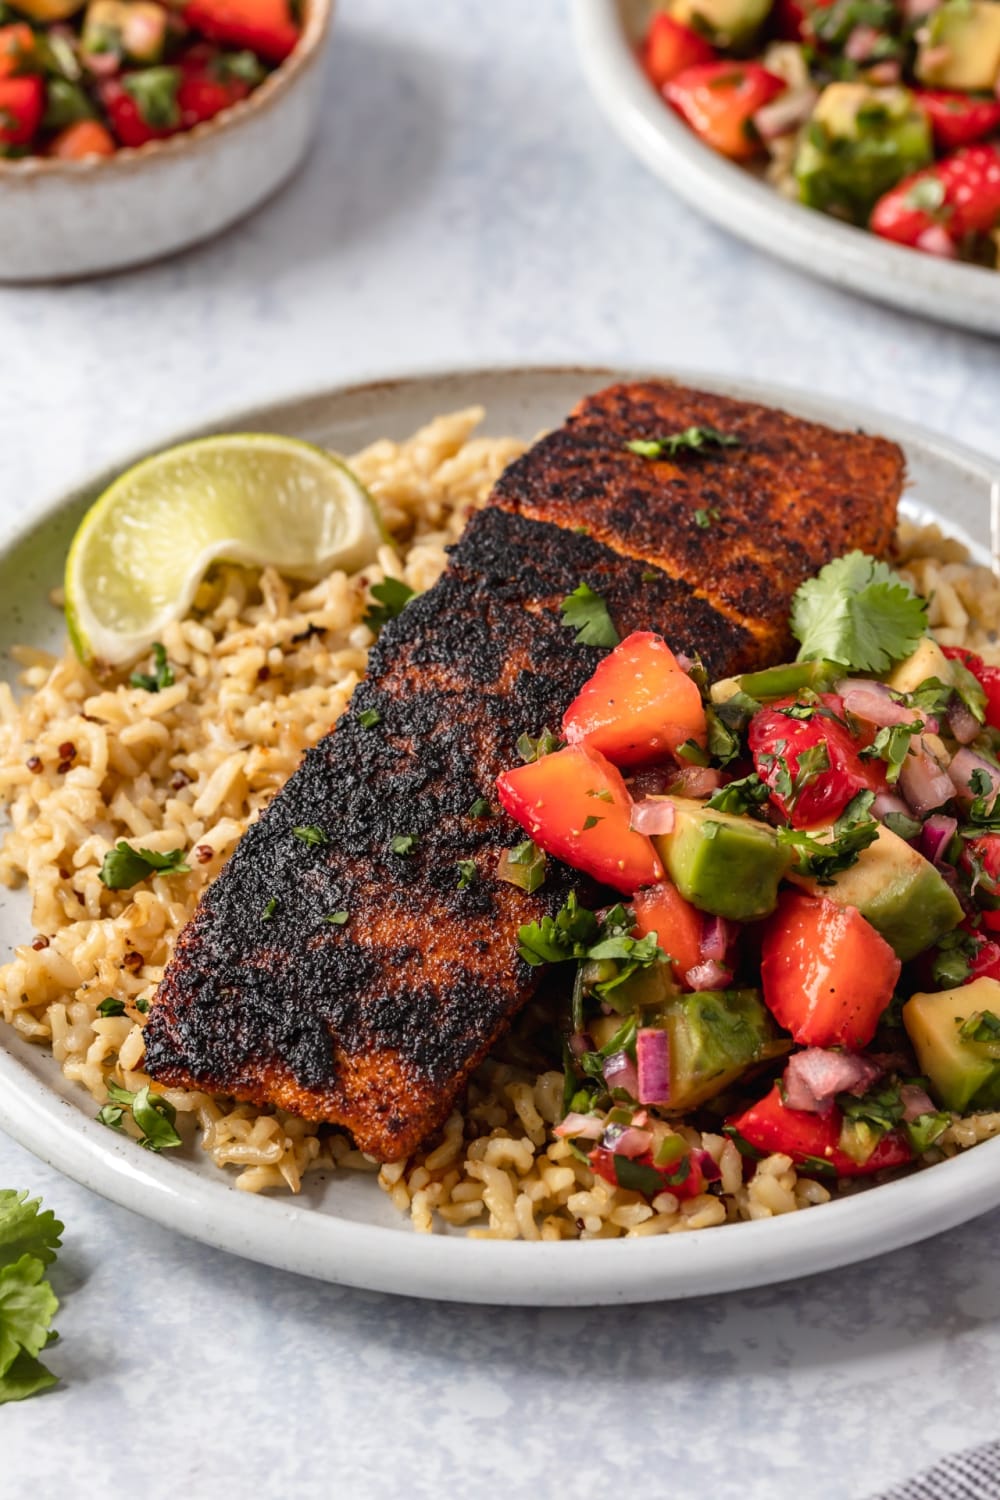 Blackened Salmon with Strawberry Avocado Salsa is a flavorful dinner!